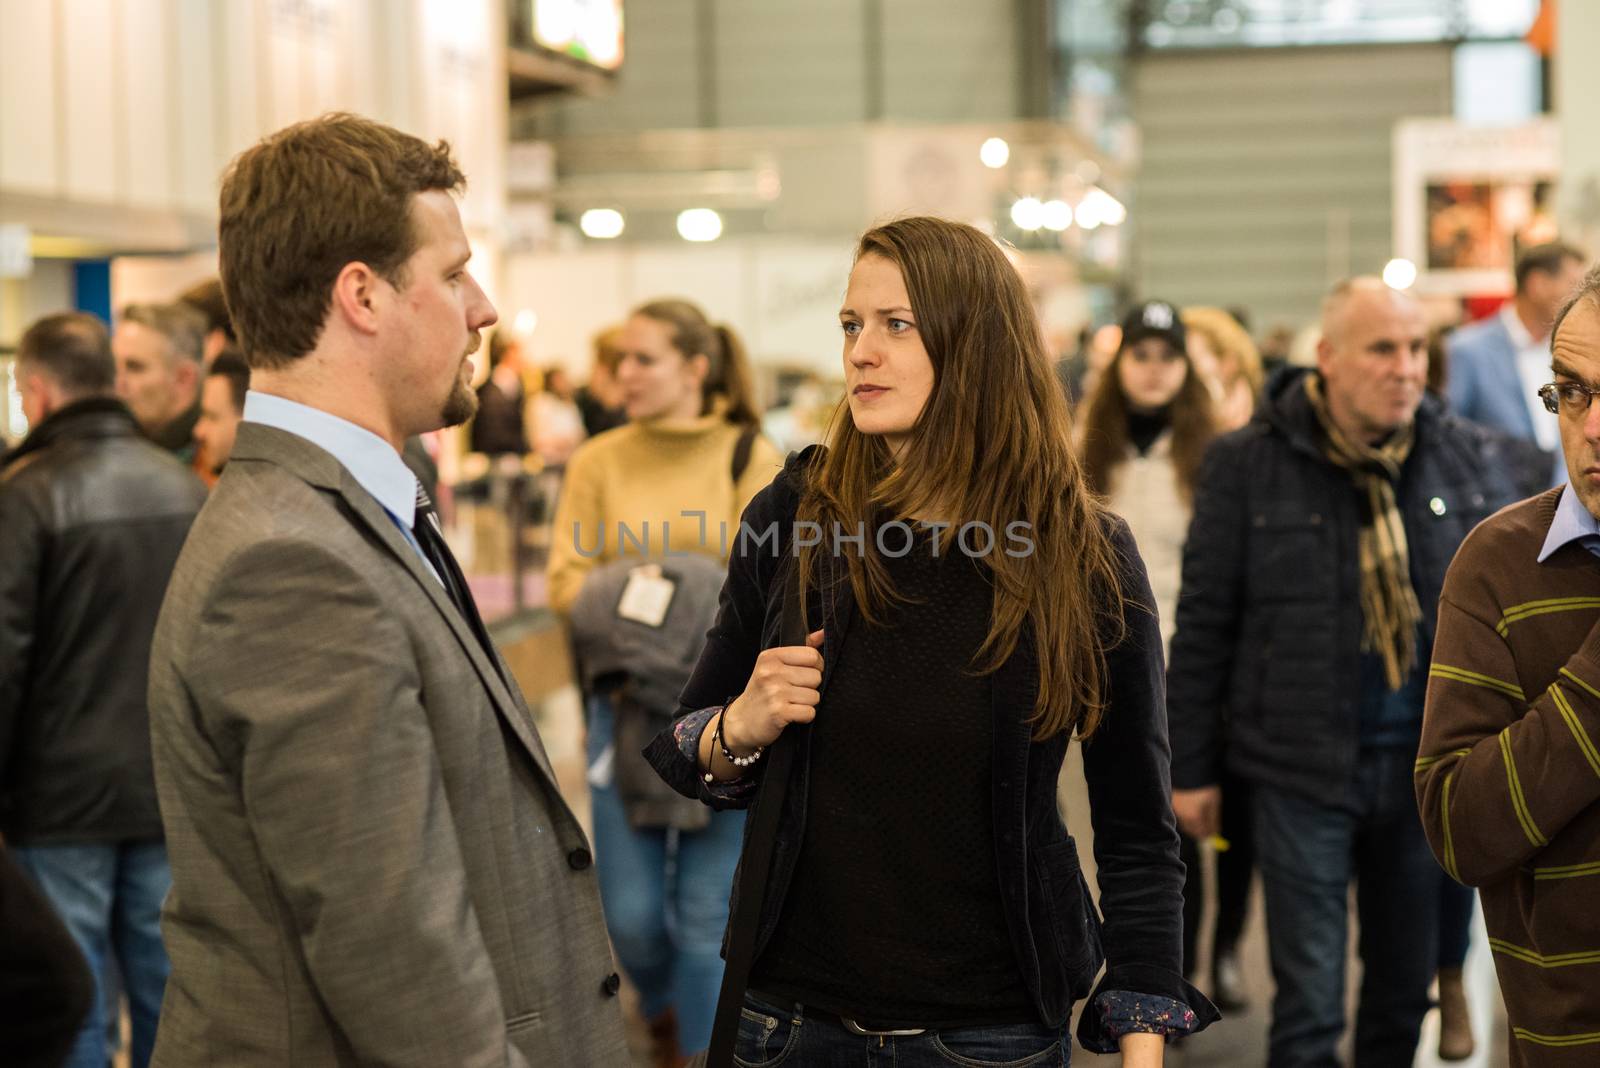 Man and woman walking in the crowd attending an event at the convention trade center in Brno. BVV Brno Exhibition center. Czech Republic